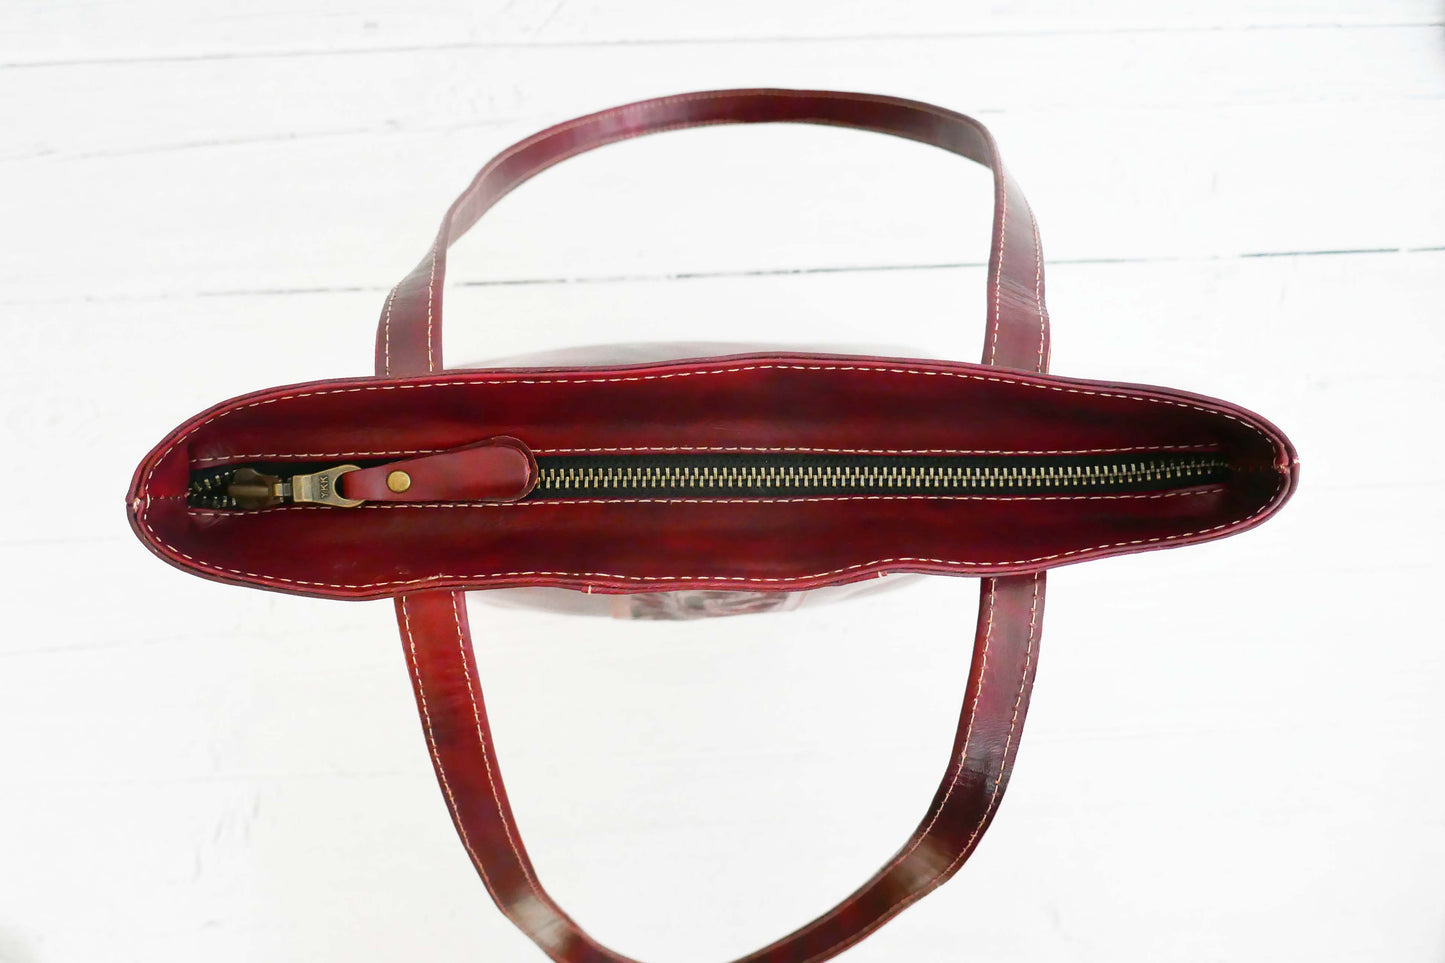 Red Tooled Leather Bag